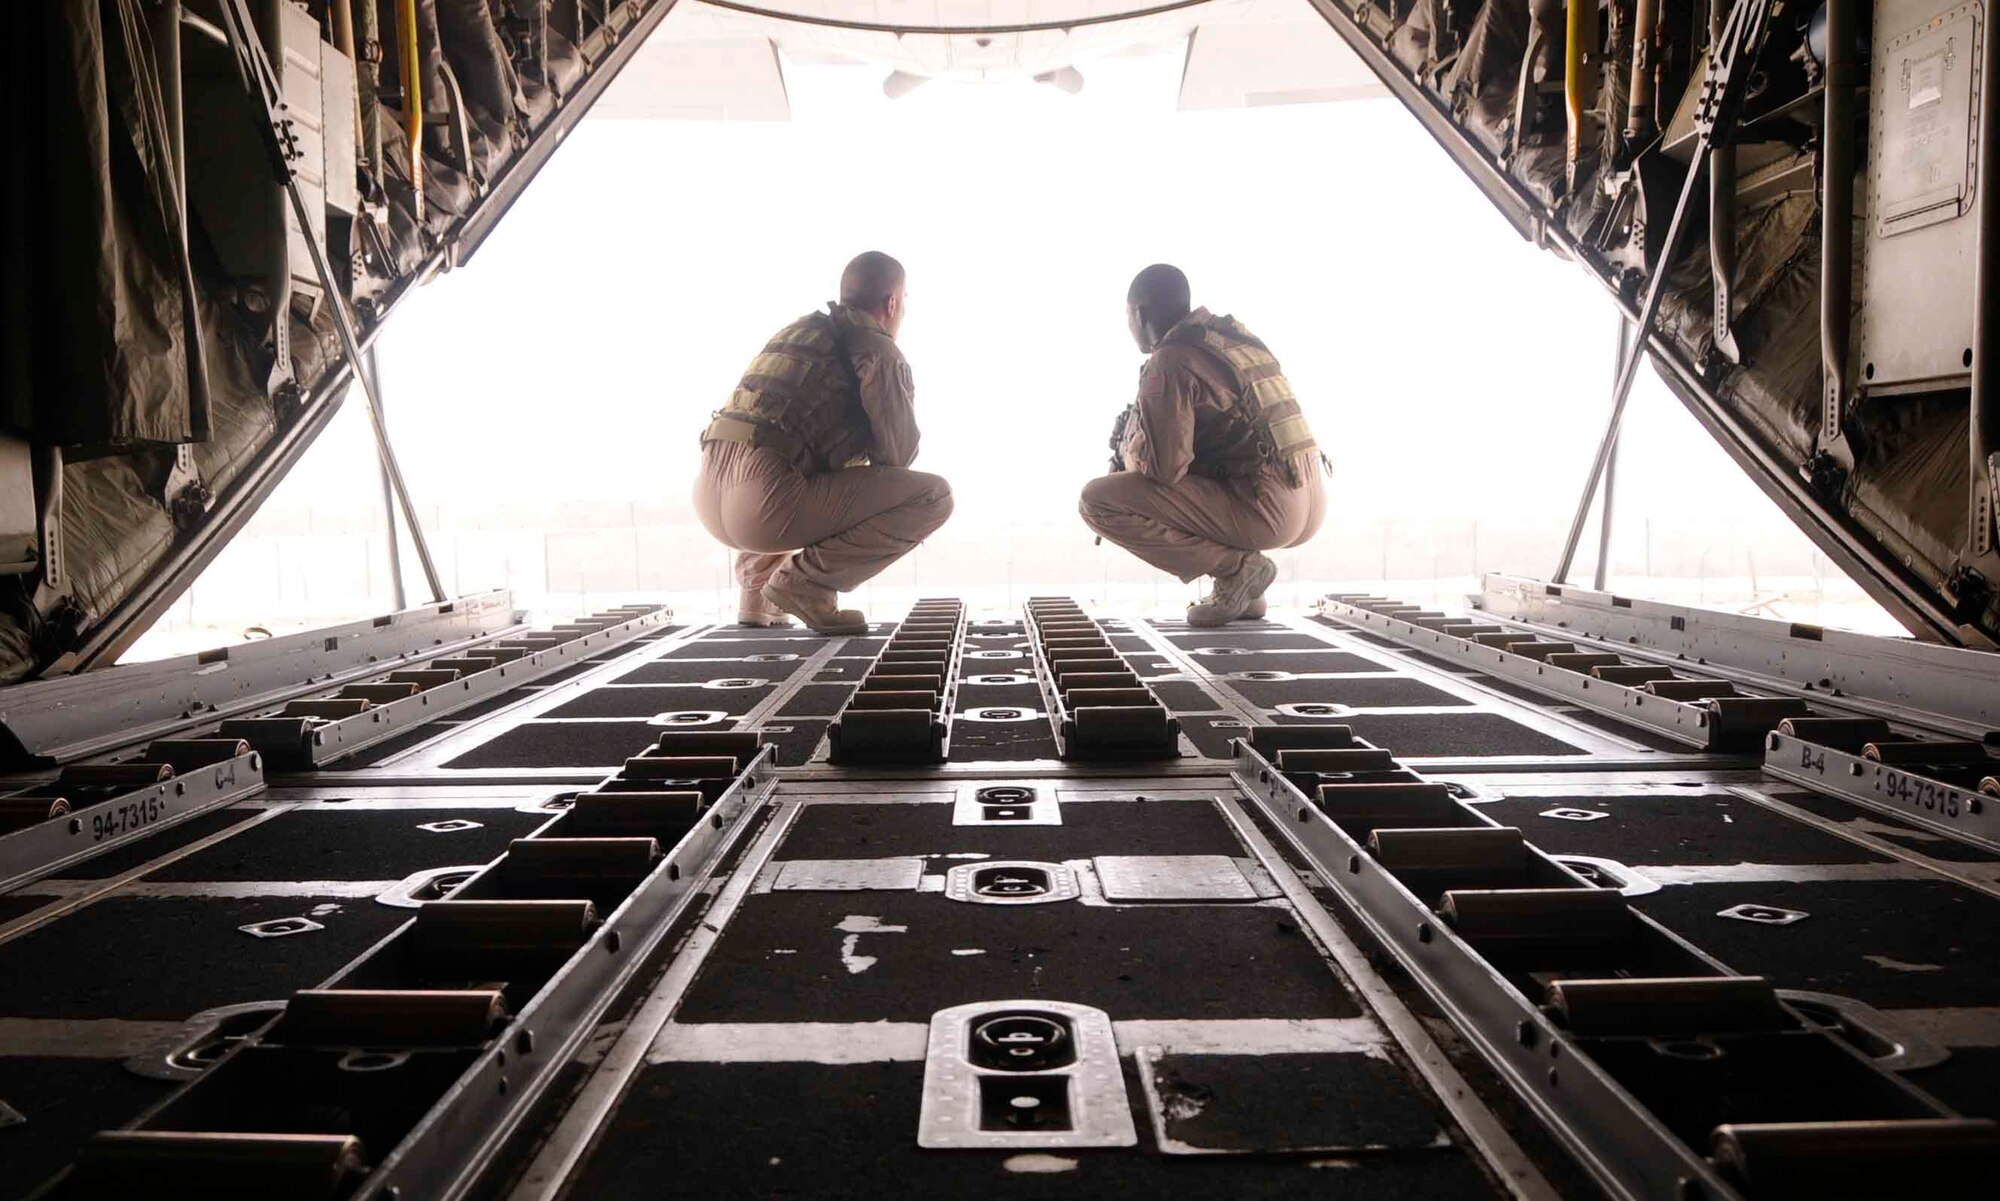 SOUTHWEST ASIA— Staff Sgt. Nahteas Murphy and Senior Airman David Mattox survey their surroundings before proceeding from the rear of a C-130 June 24. Both U.S. Air Force members are apart of the Fly Away Security Team assigned to the 379th Expeditionary Security Forces Squadron (U.S. Air Force photo/ Senior Airman Domonique Simmons)